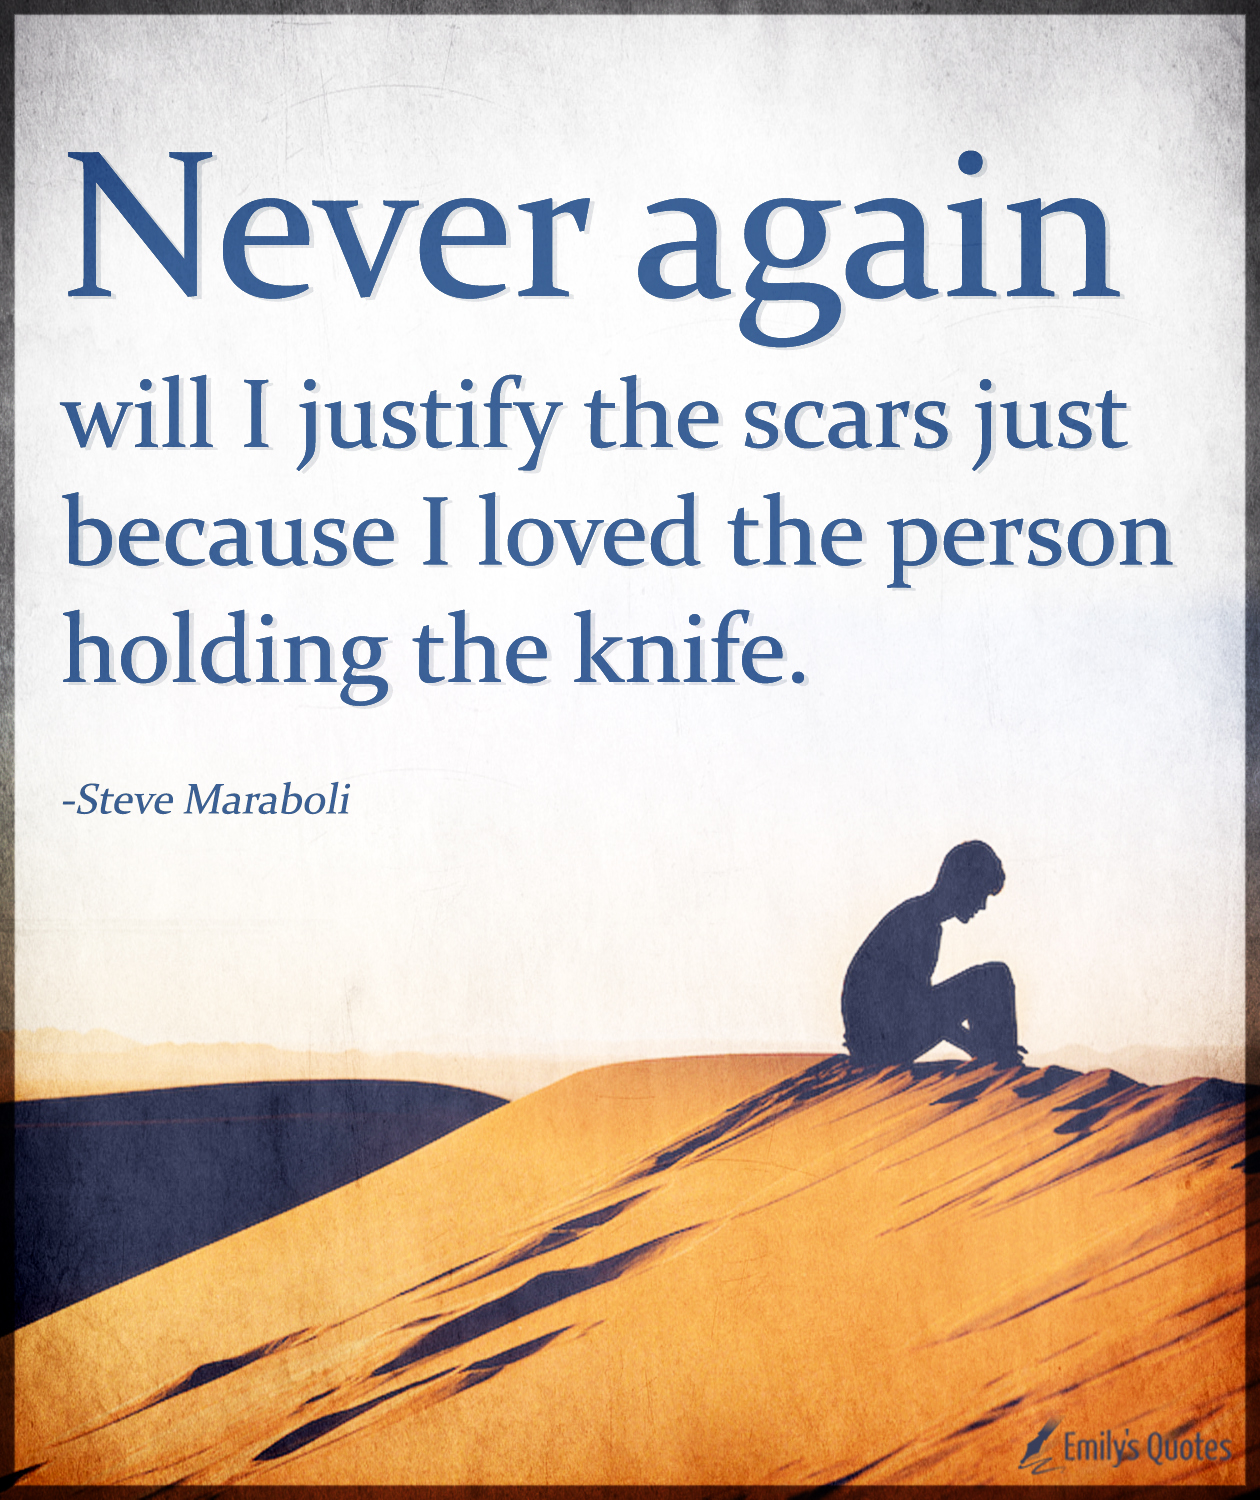 Never again will I justify the scars just because I loved the person